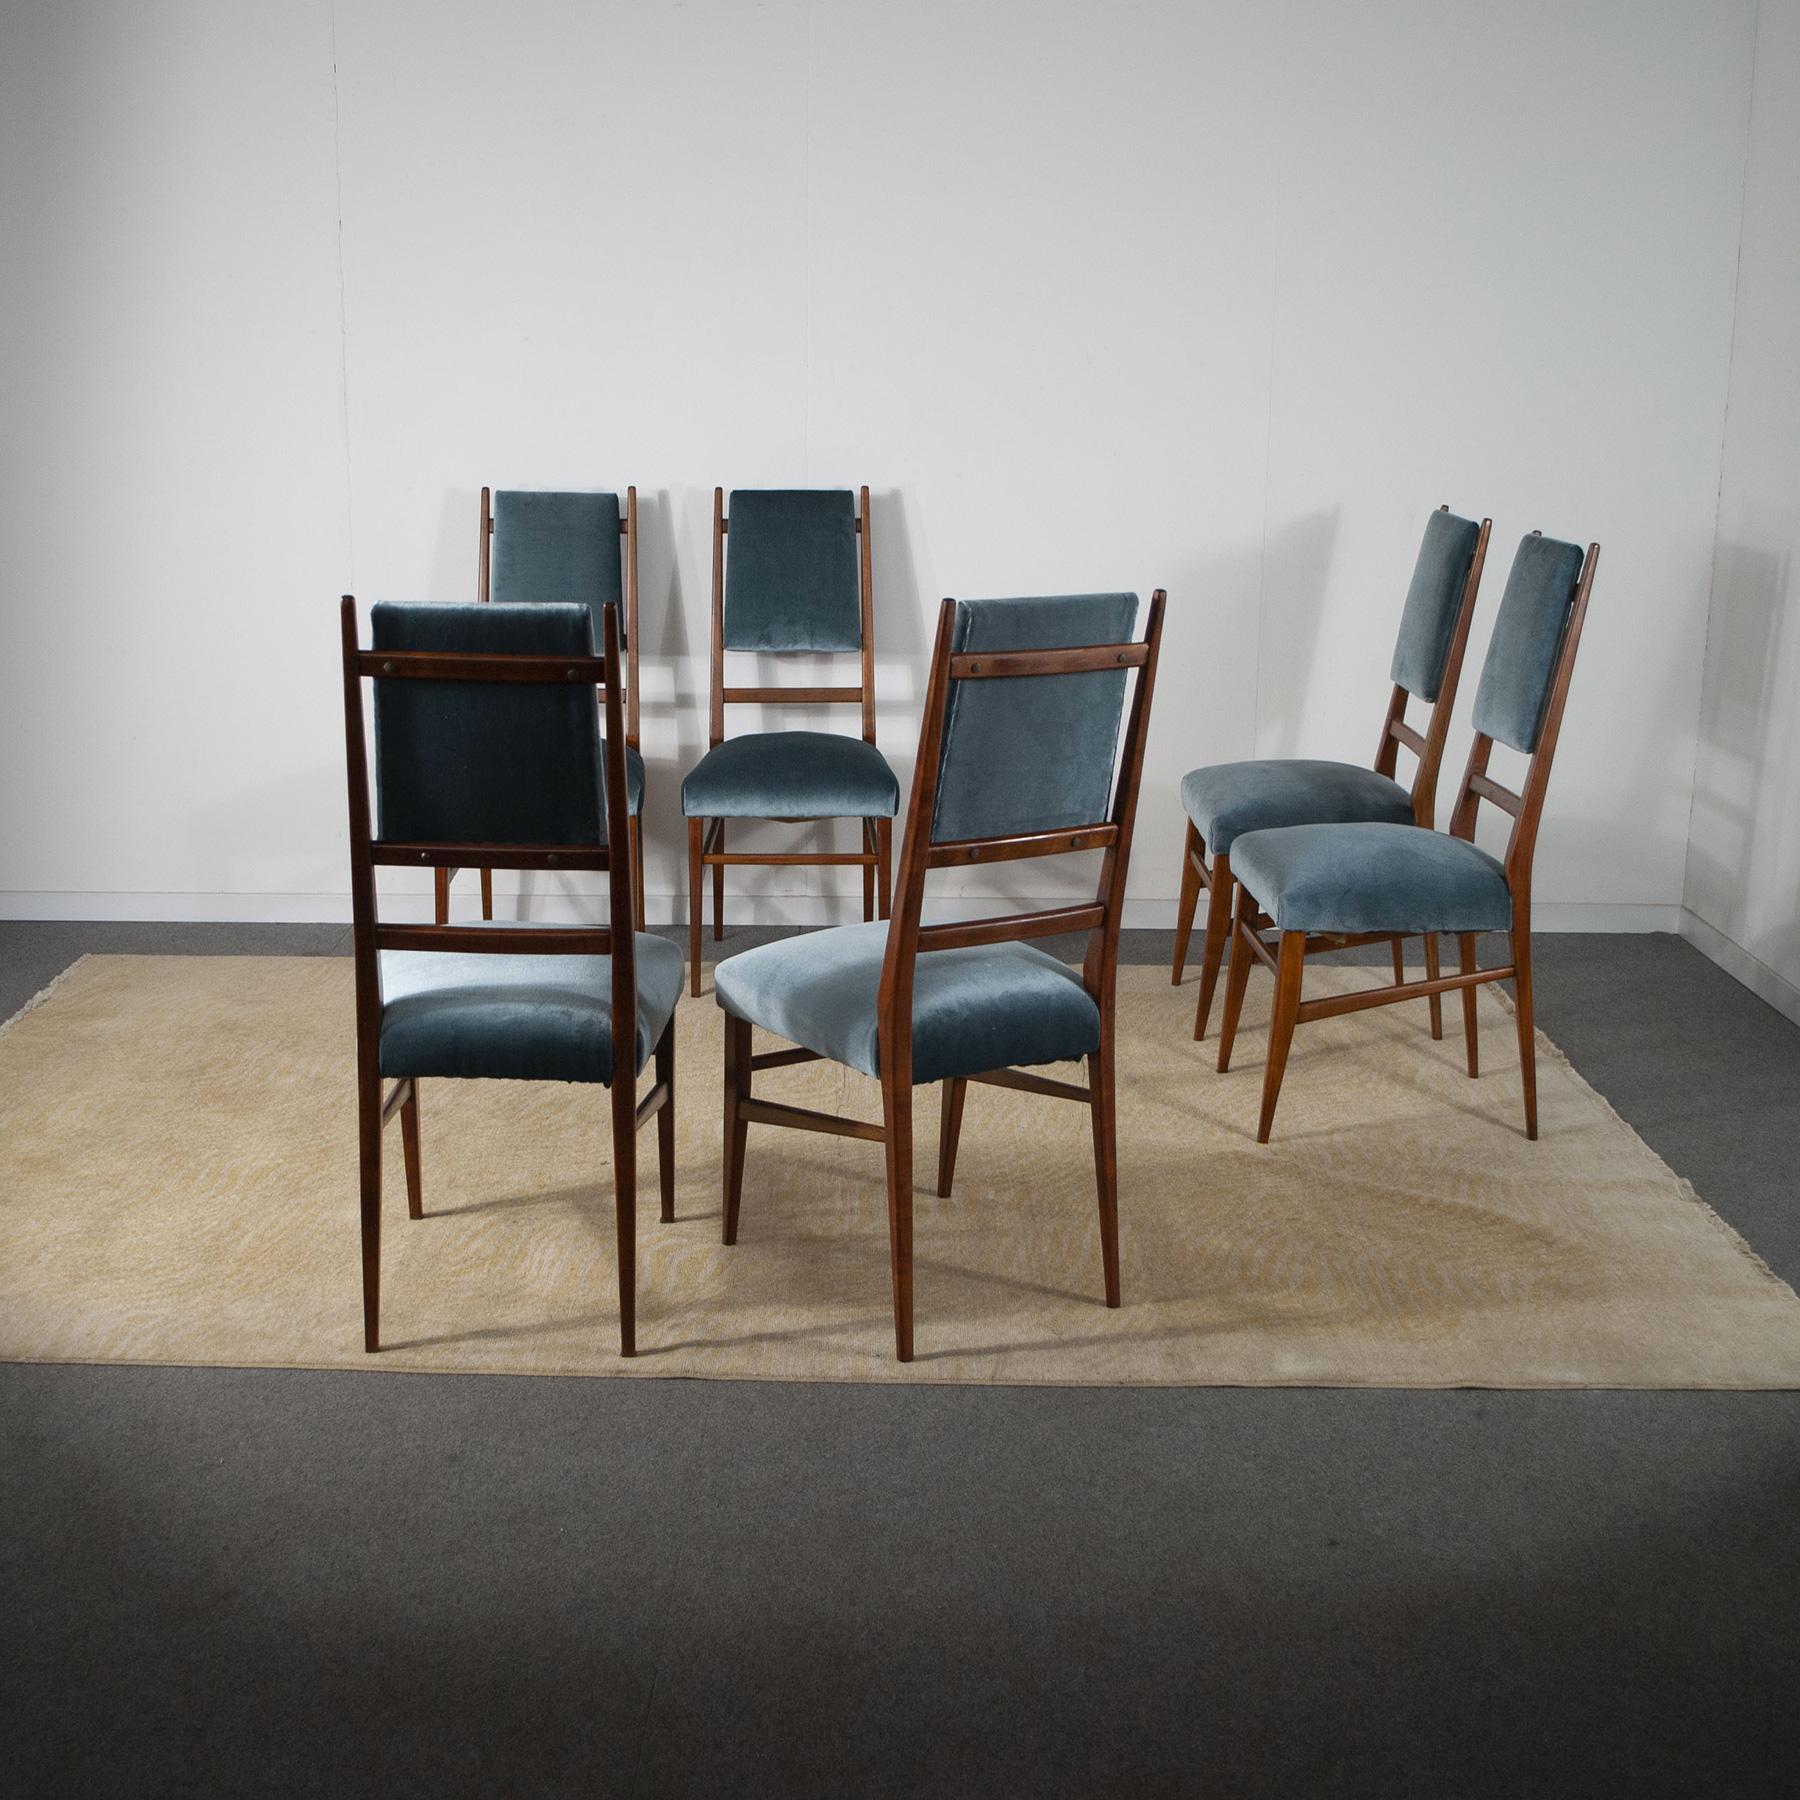 Velvet Carlo de Carli Set of Six Rare Chairs from the Fifties For Sale